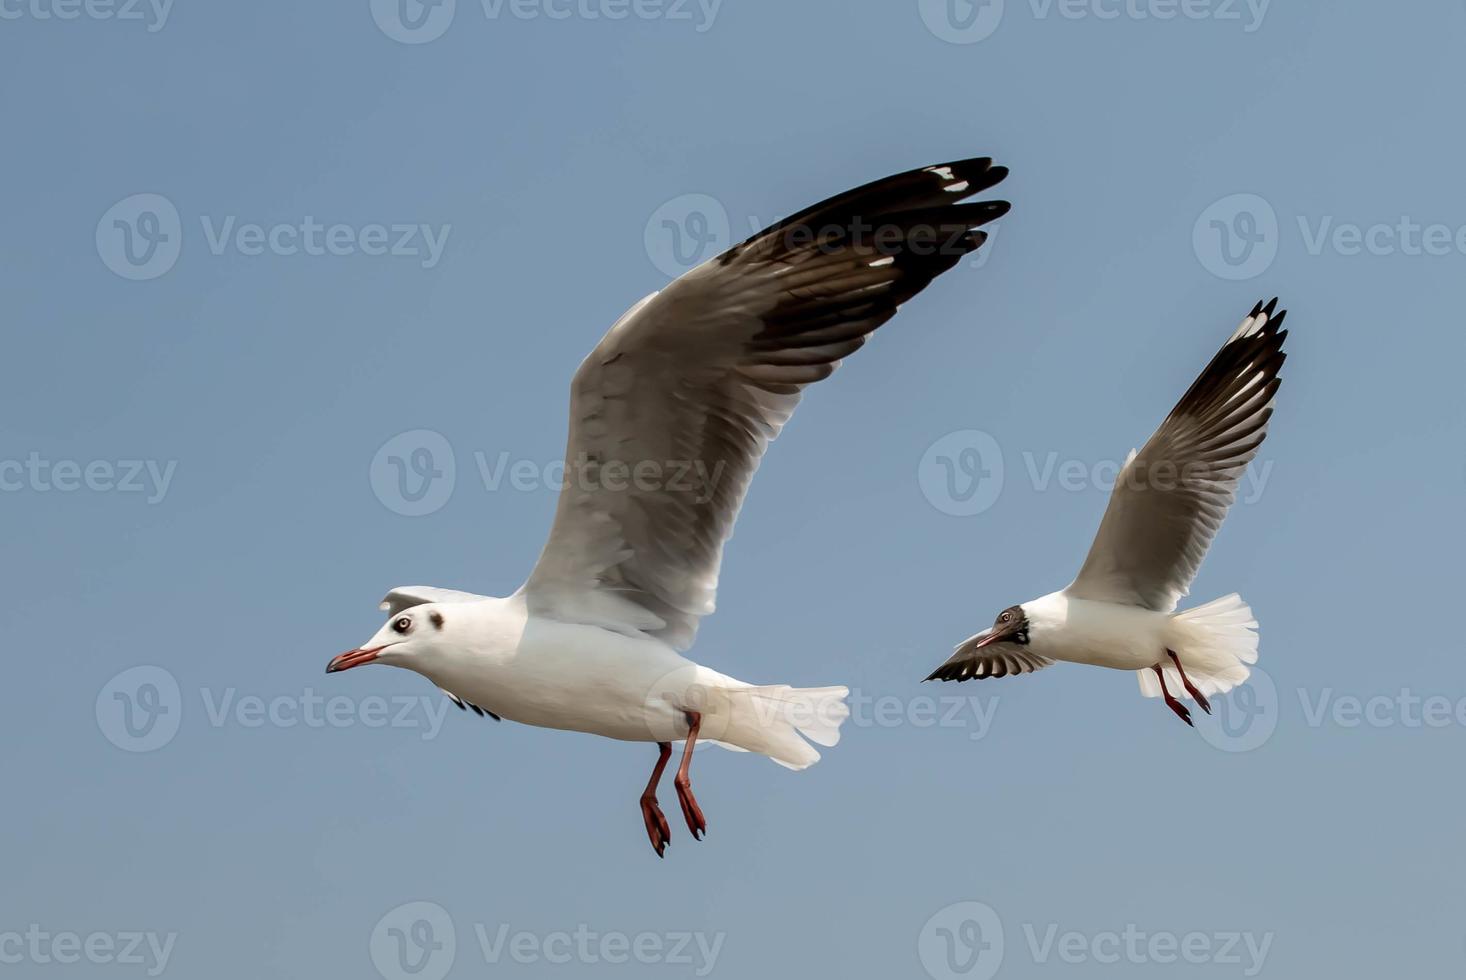 Seagulls flying in the sky photo